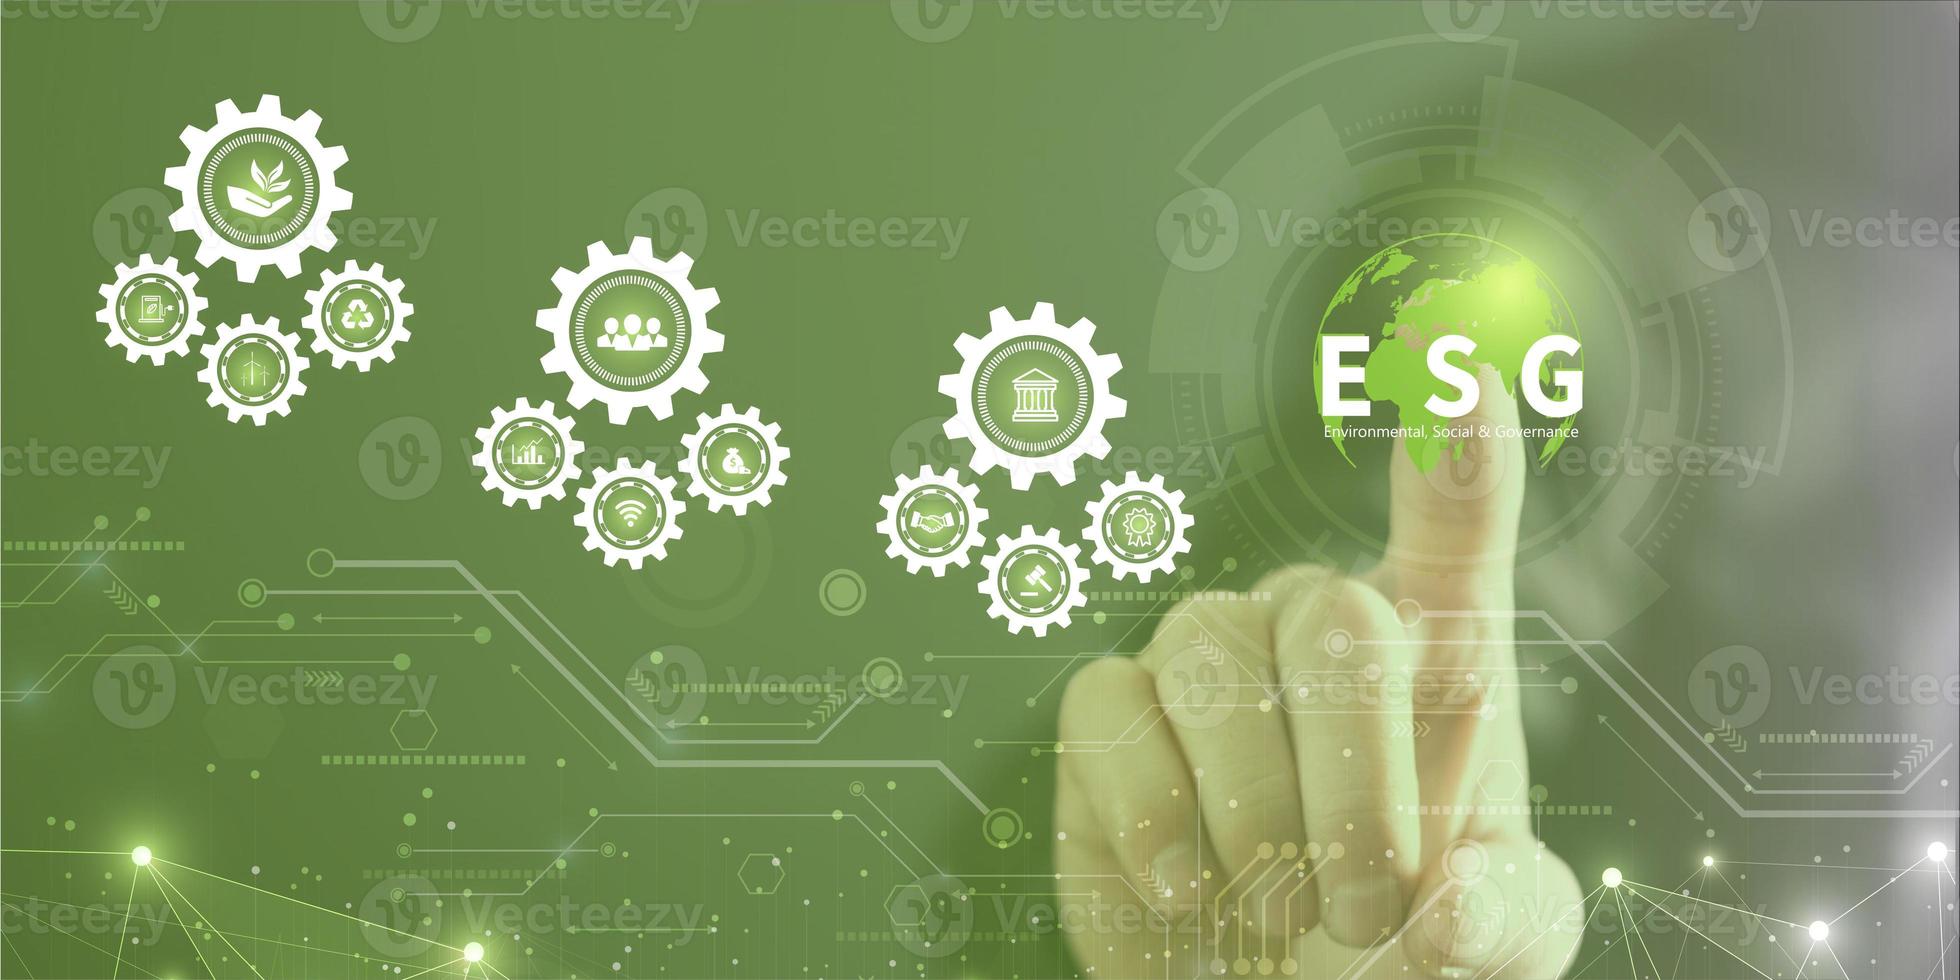 Businessman touching ESG icon on virtual screen for environmental, social, and governance in sustainable and ethical business on a technology green background photo